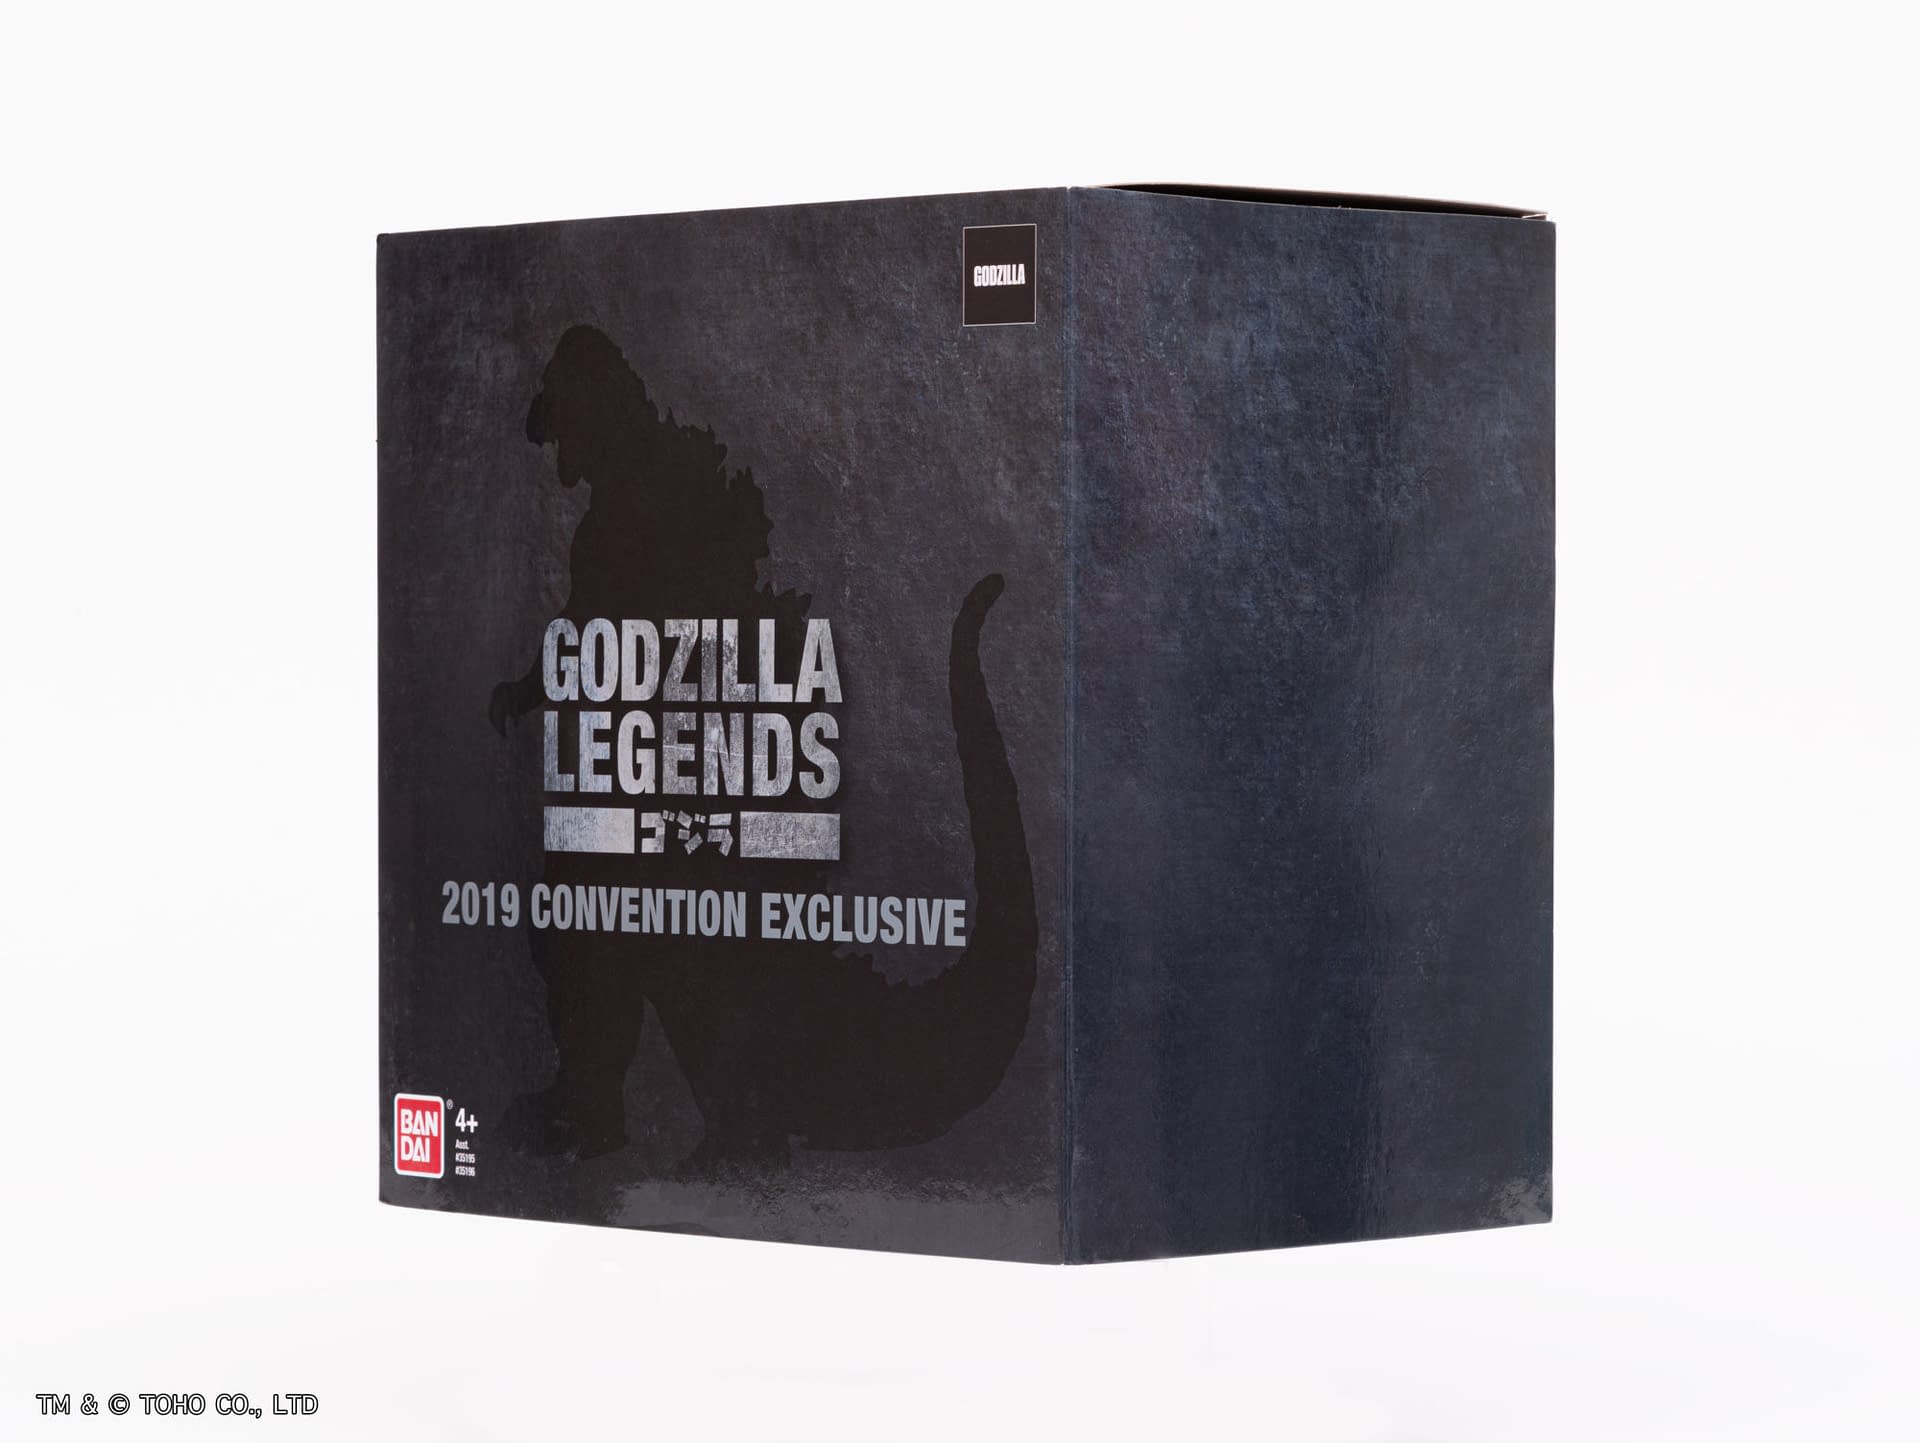 Godzilla Makes His Way to SDCC With a New Exclusive Figure